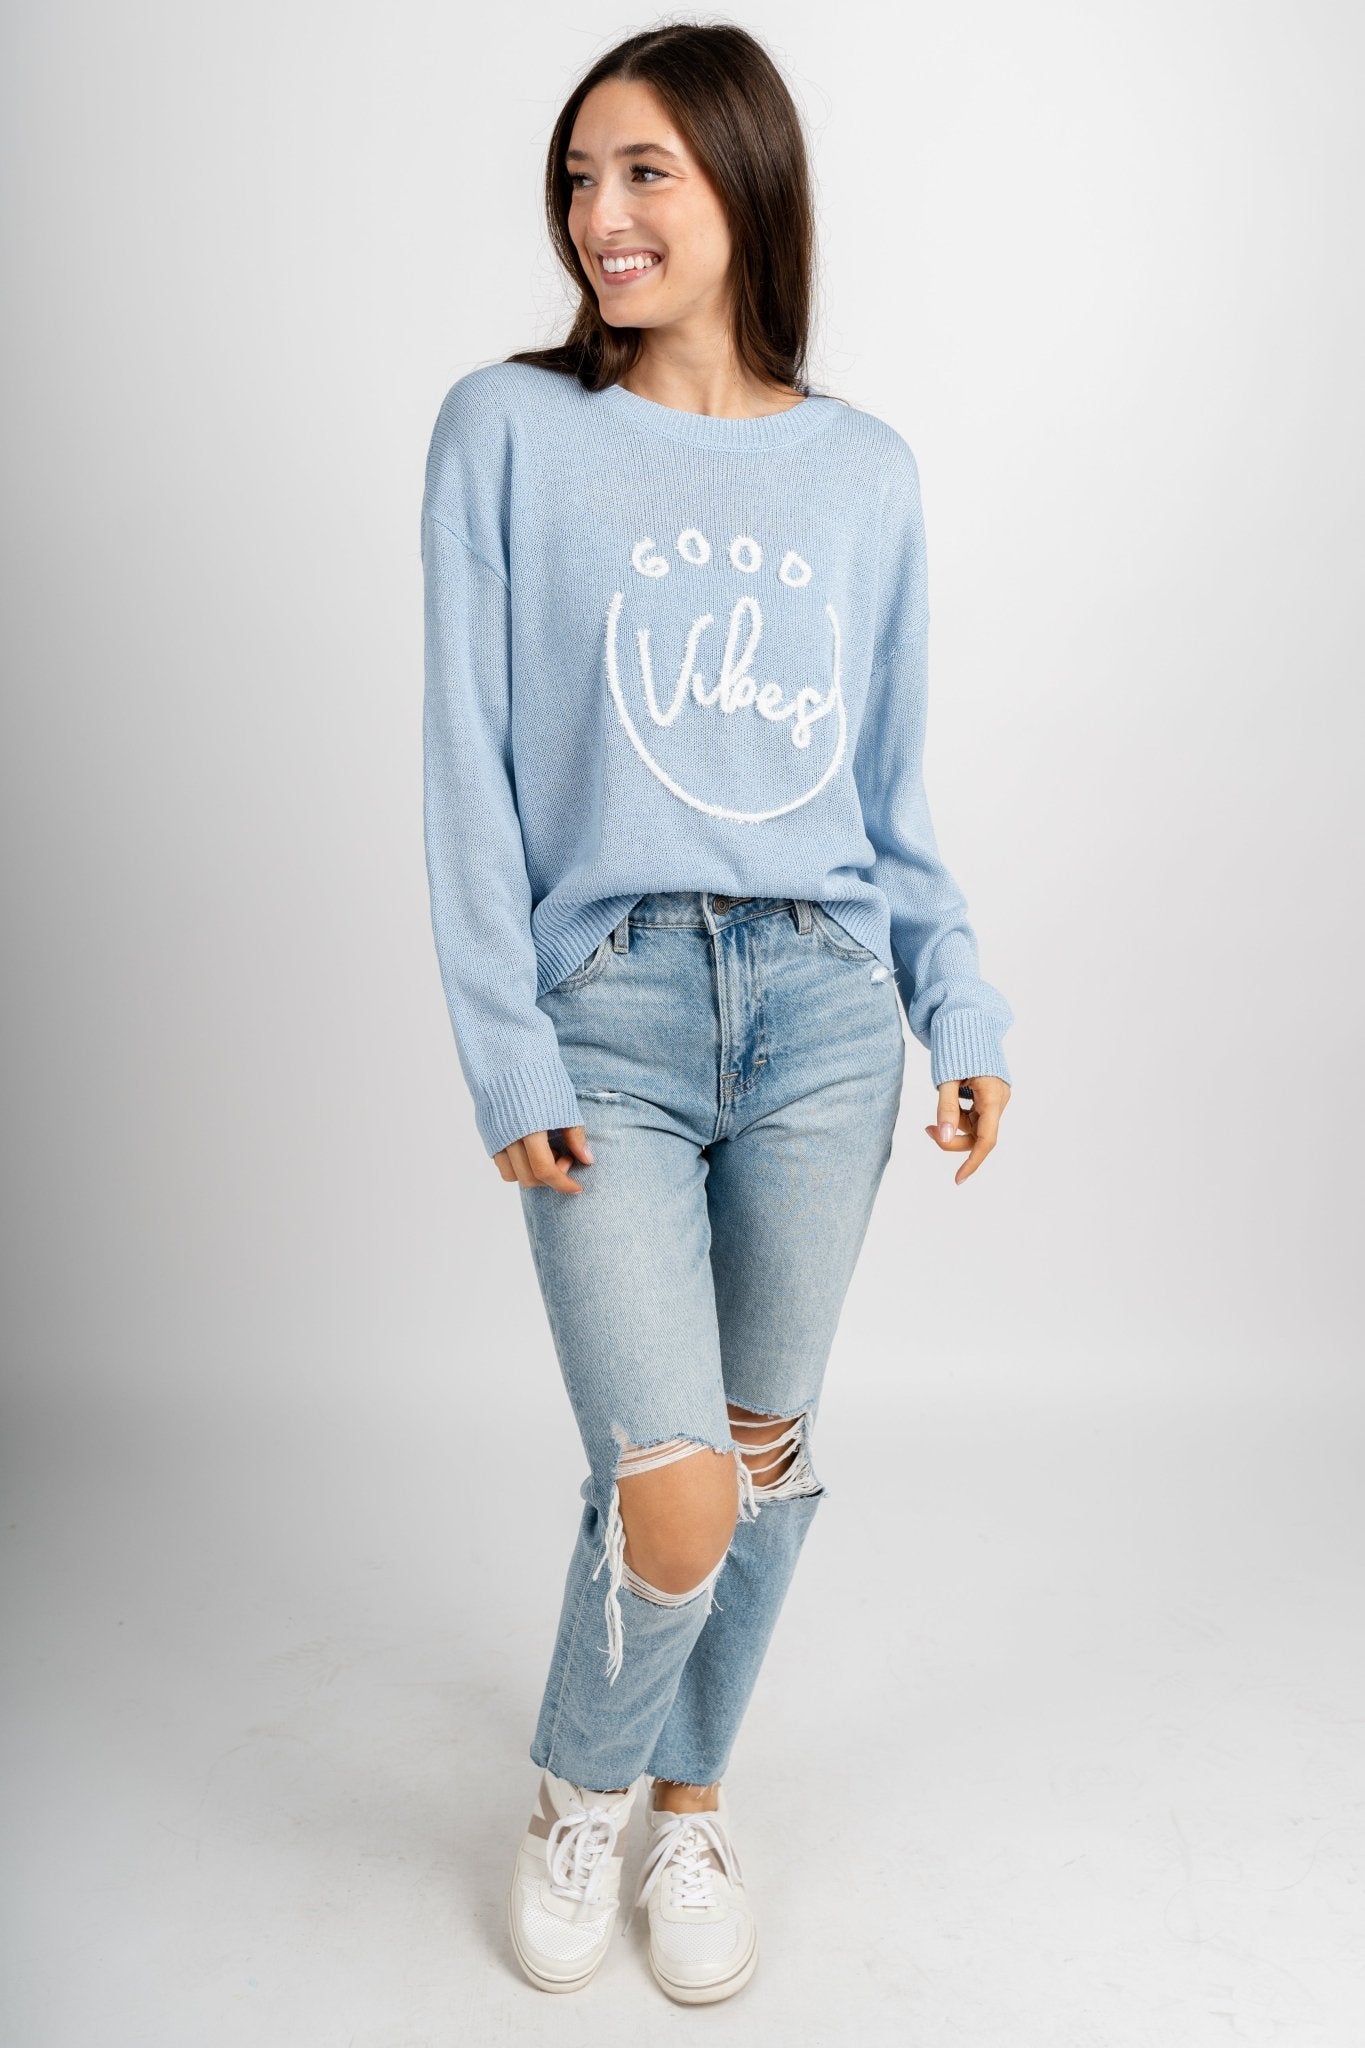 Good vibes tinsel sweater blue – Unique Sweaters | Lounging Sweaters and Womens Fashion Sweaters at Lush Fashion Lounge Boutique in Oklahoma City